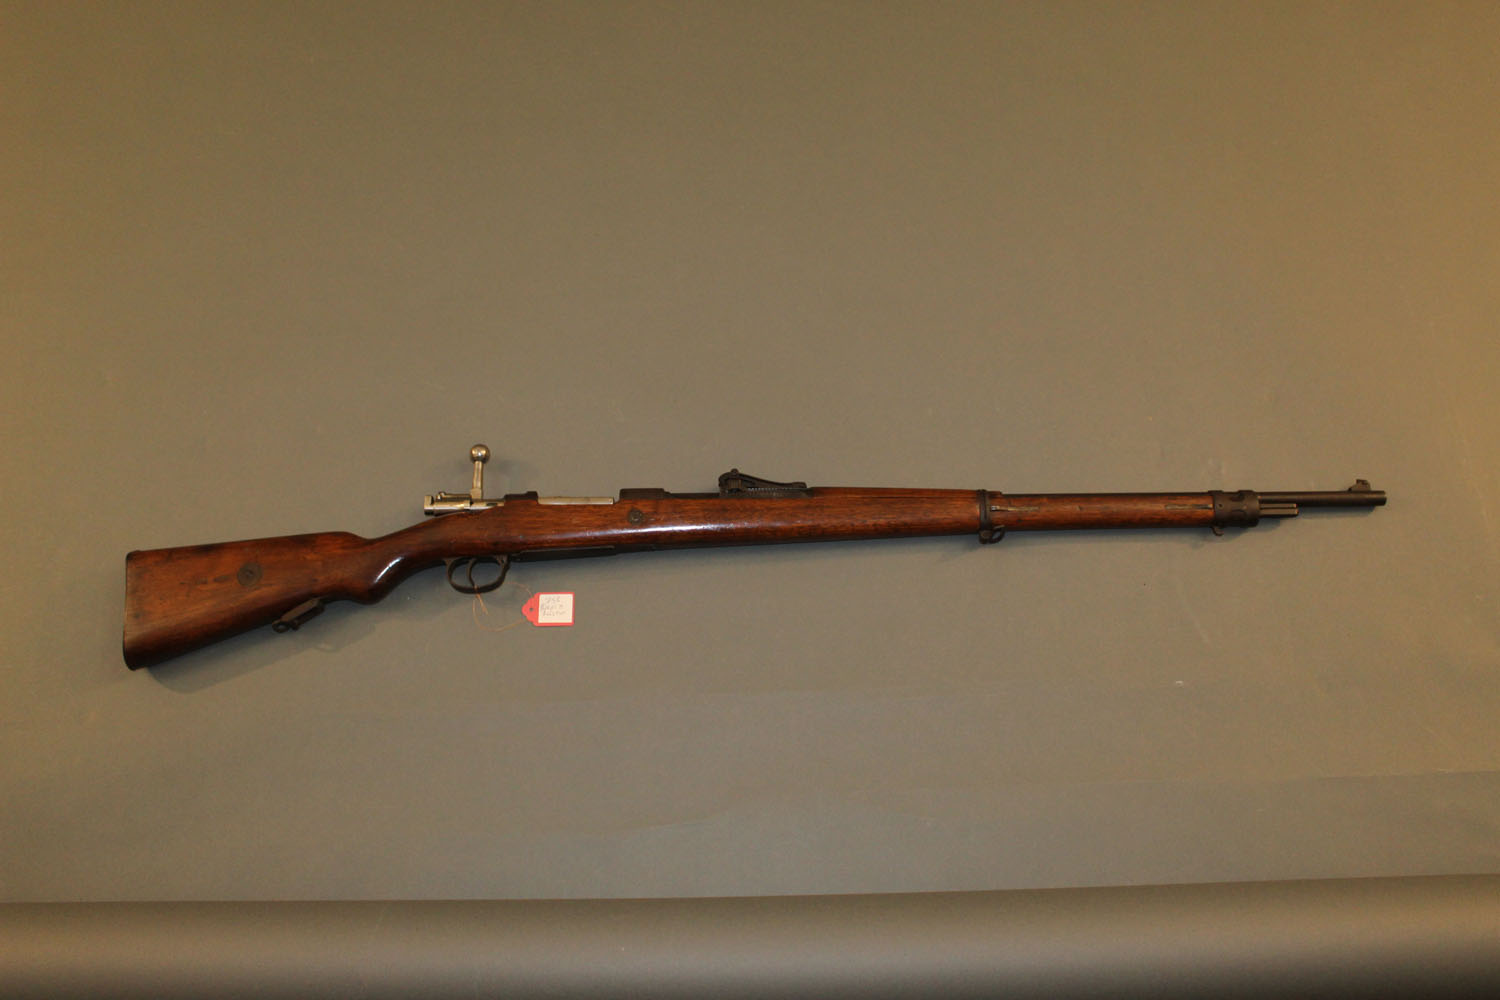 A German Mauser 98 bolt action rifle dated 1915 WW1. Serial No. 6298, stock No. 758.